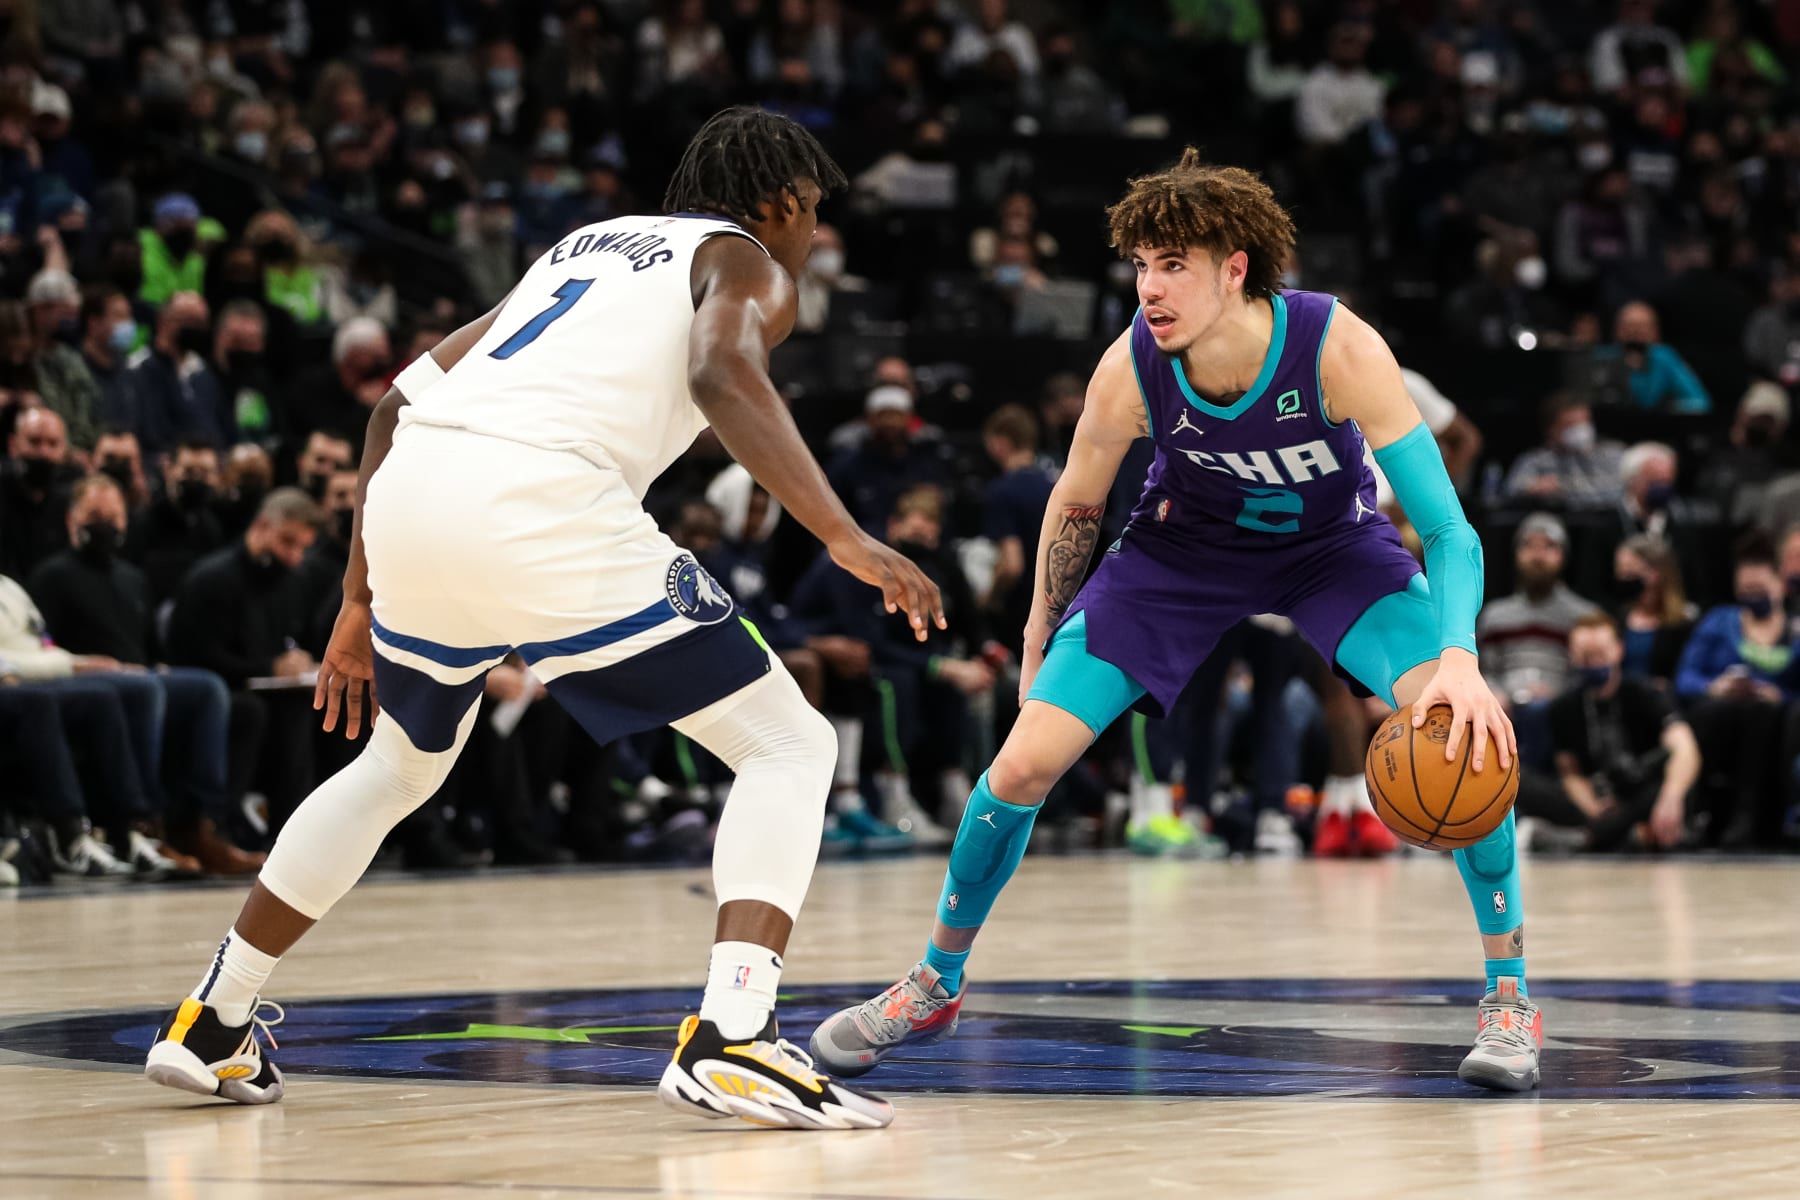 Timberwolves return to action after All-Star break at home vs. Hornets